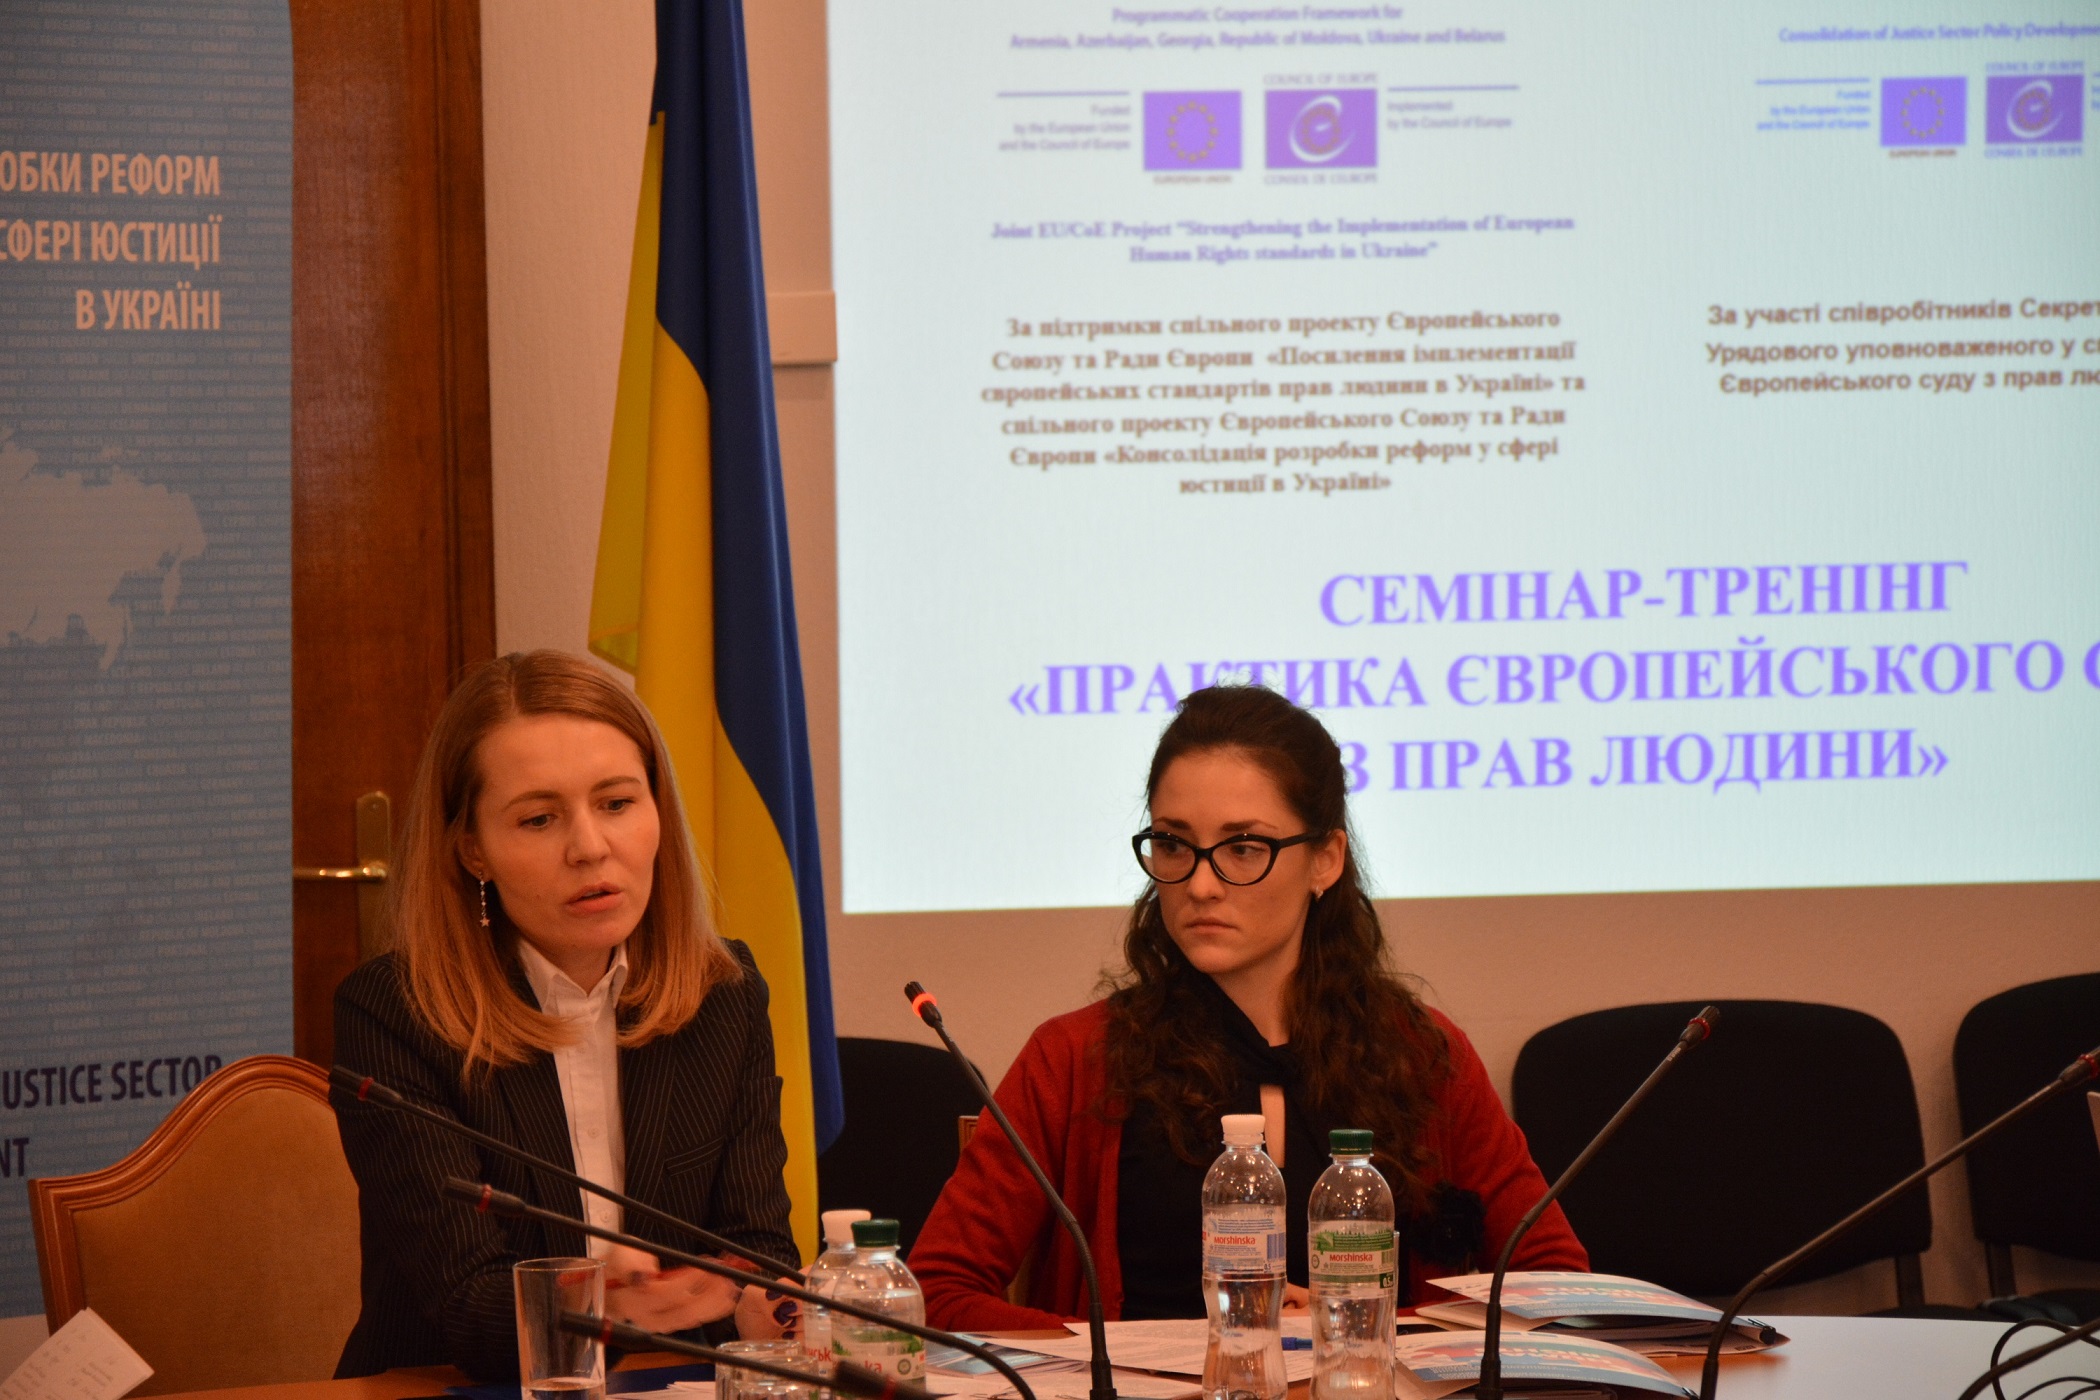 Workshops for staff of the Secretariat of the Verkhovna Rada of Ukraine on implementation of the European Court of Human Rights case-law